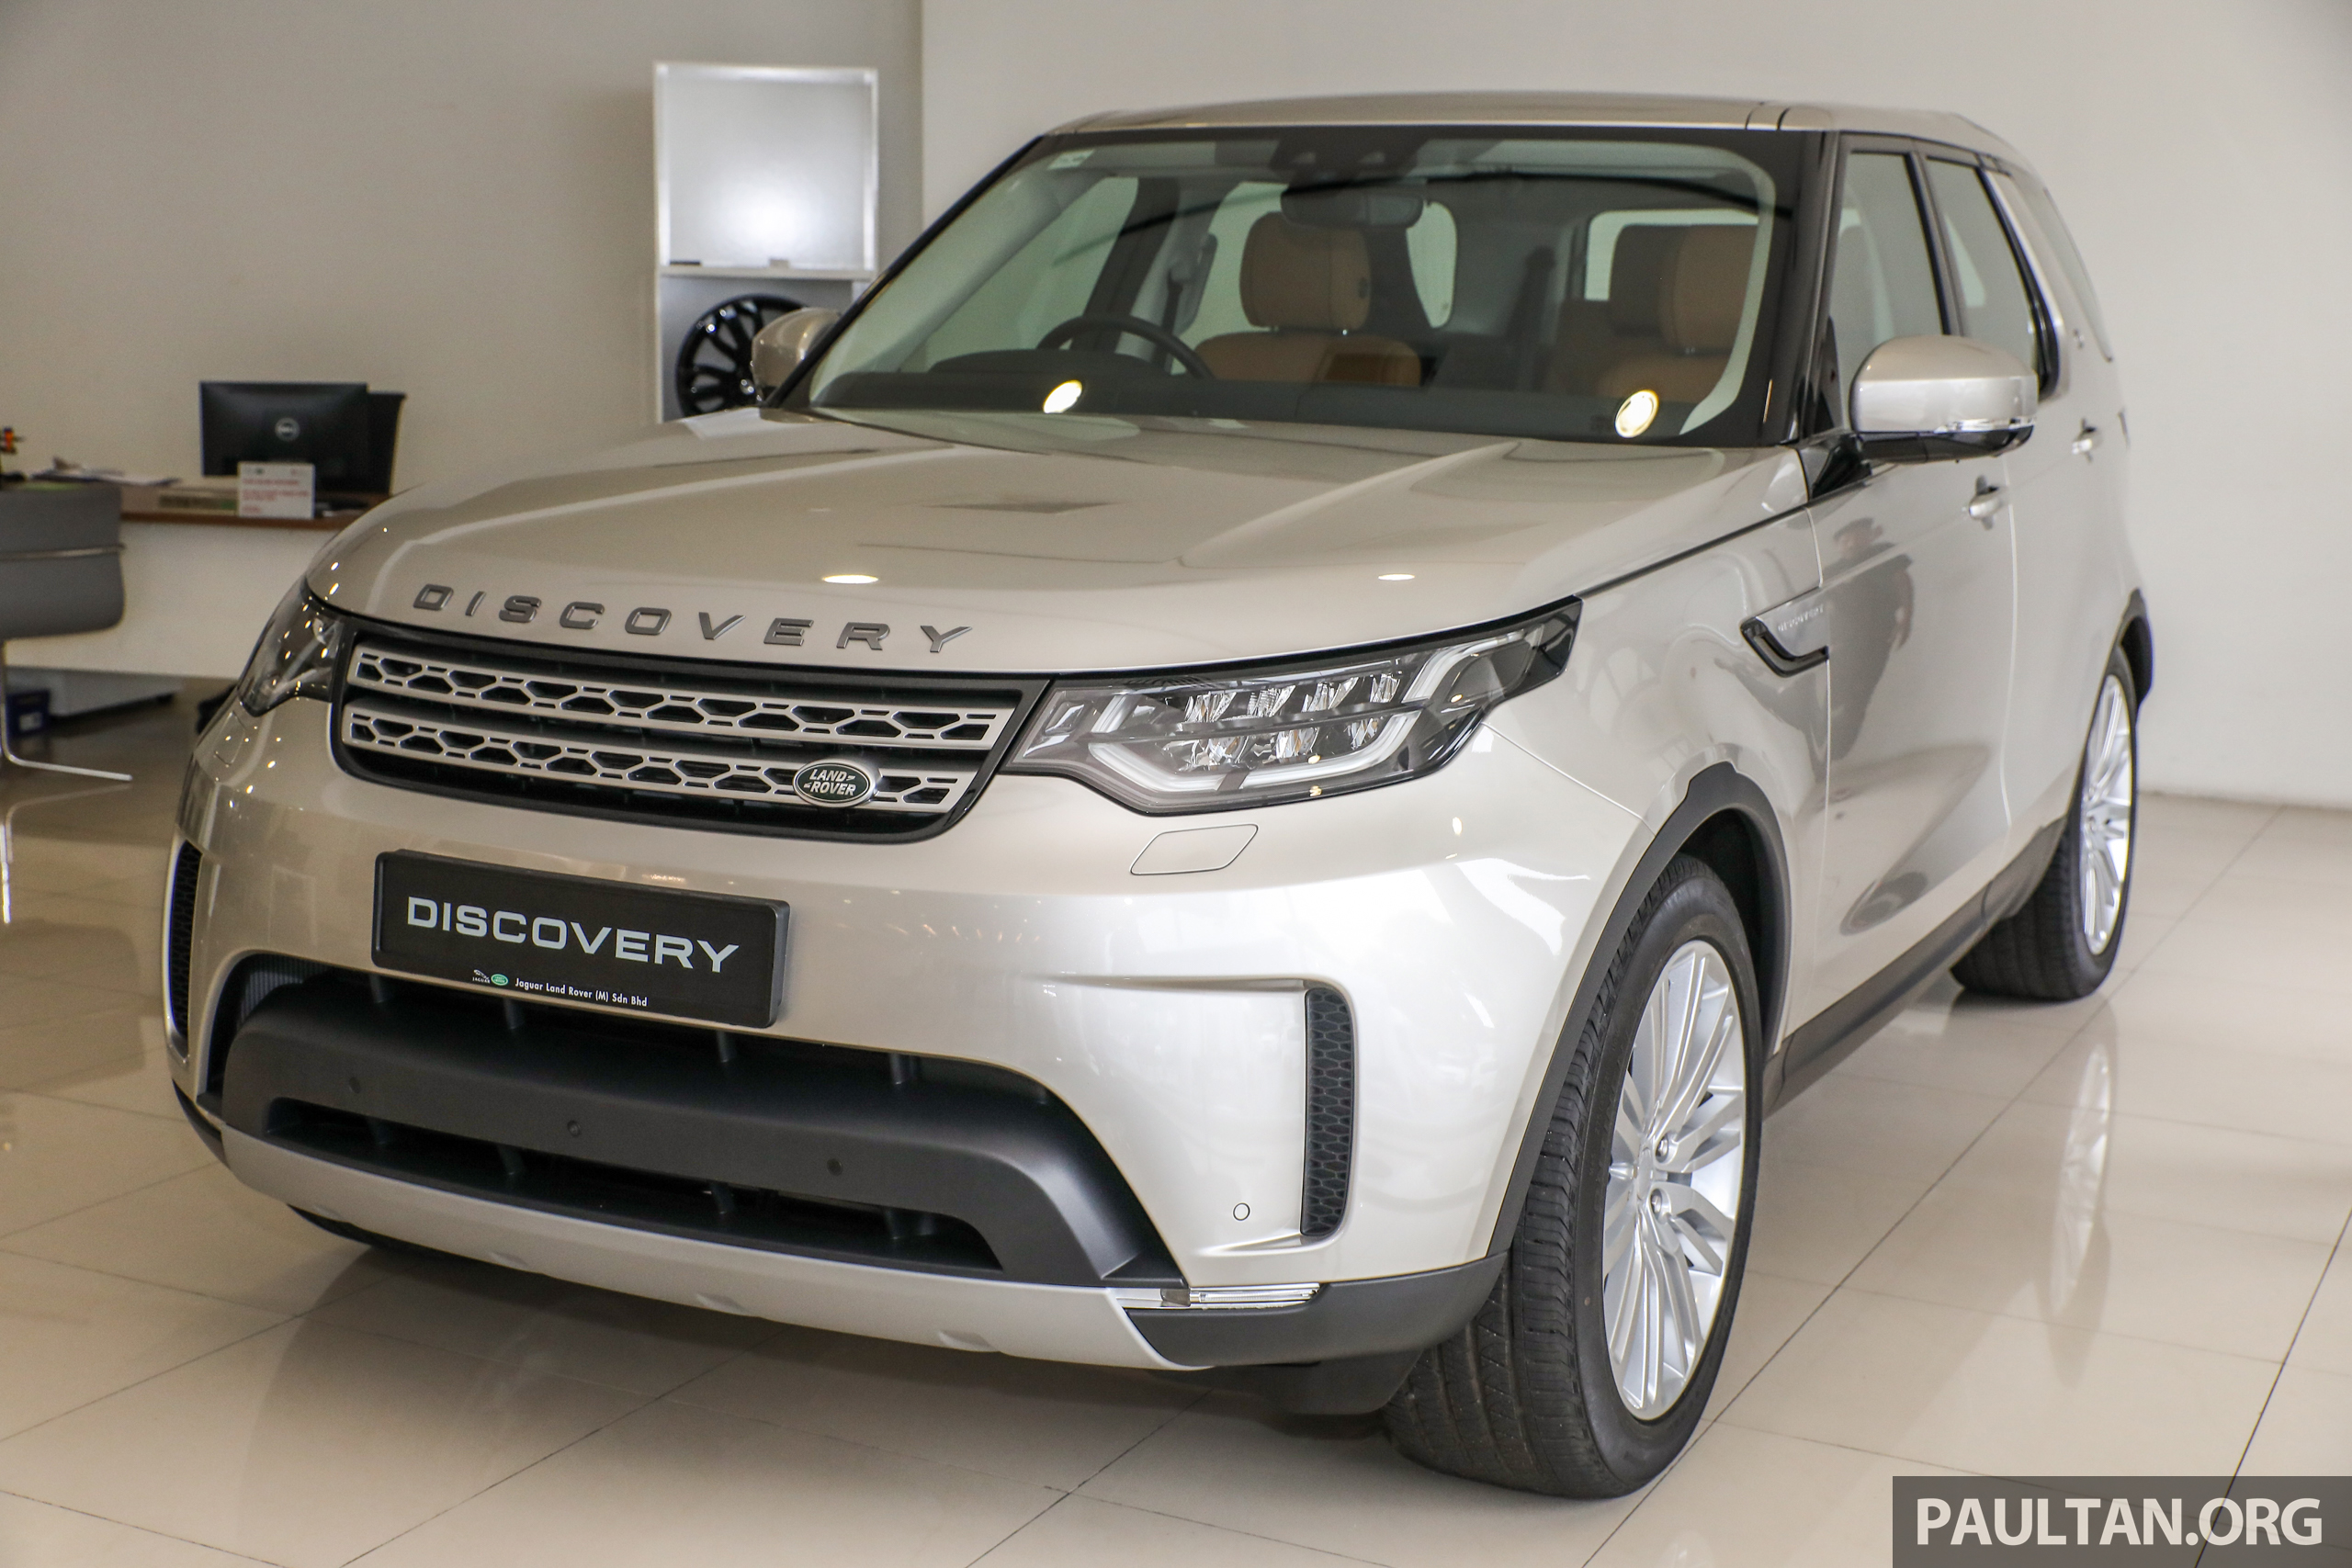 Тд дискавери. Land Rover Discovery l462. Discovery 5 l462. Land Rover Discovery v l462. Дискавери l 462.